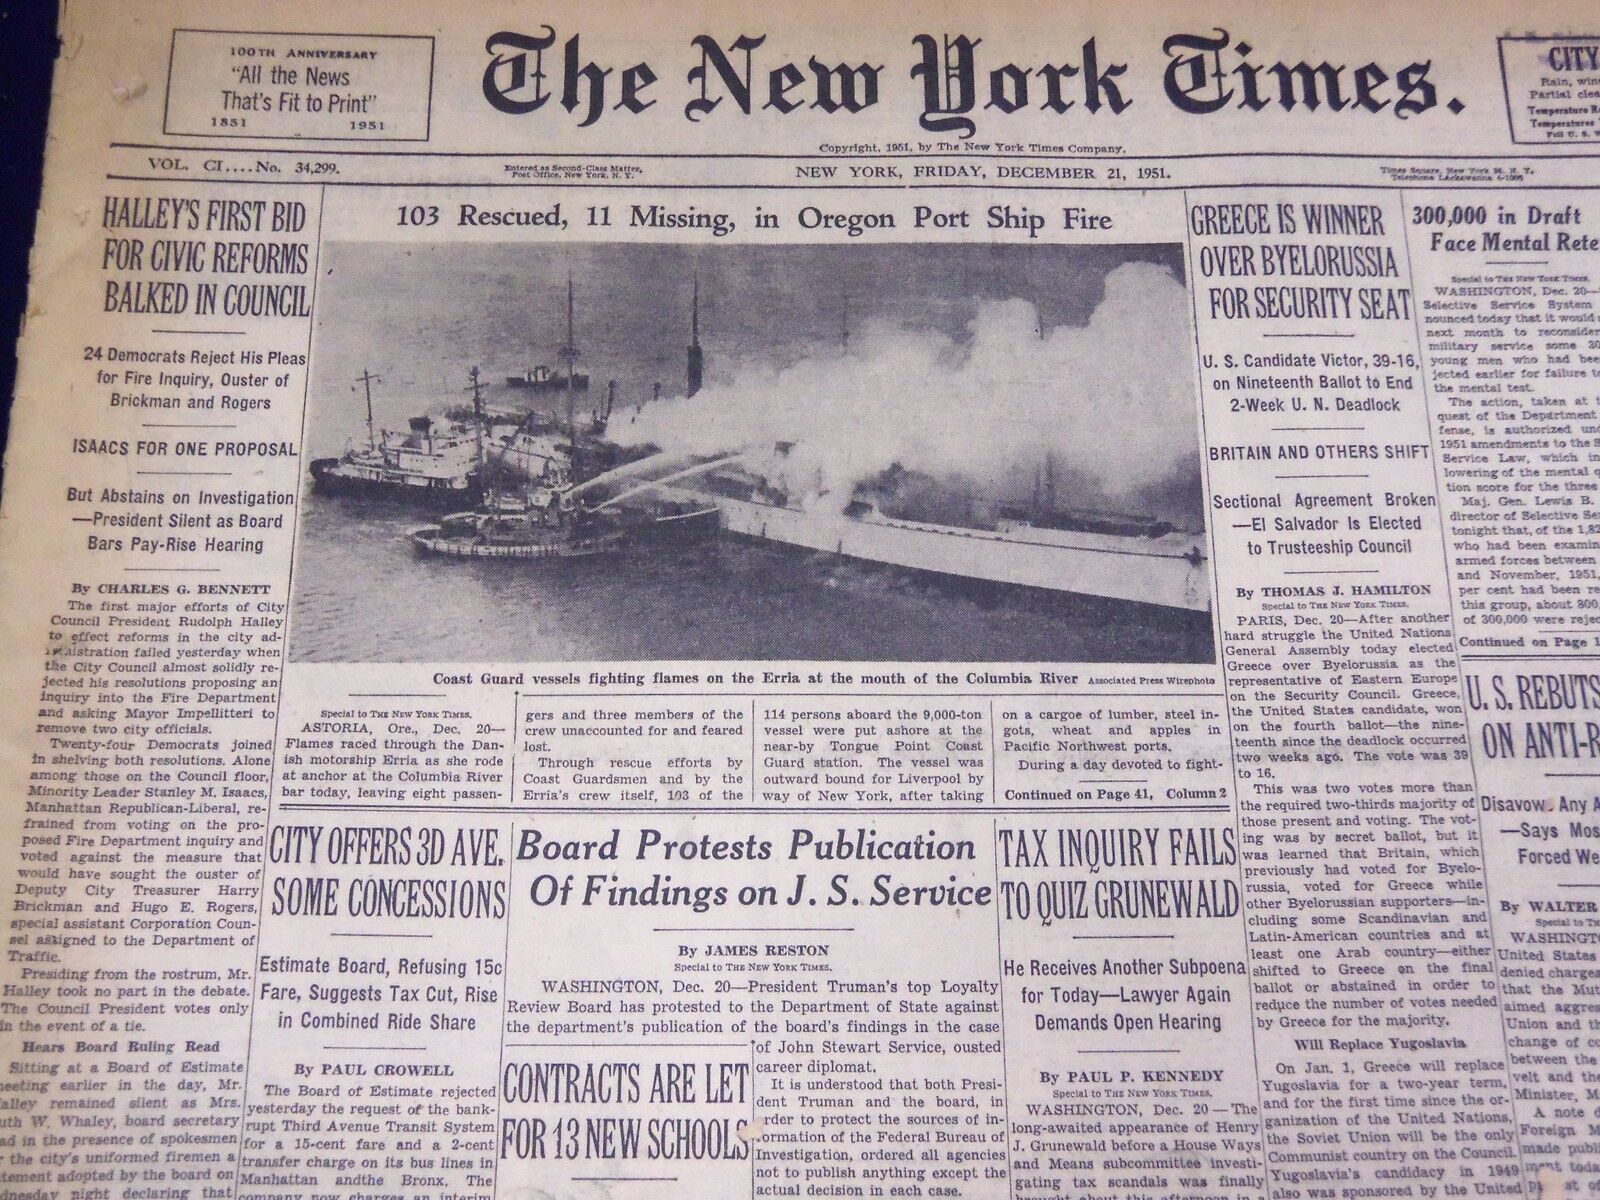 1951 DEC 21 NEW YORK TIMES - 103 RESCUED IN OREGON PORT SHIP FIRE - NT 2262